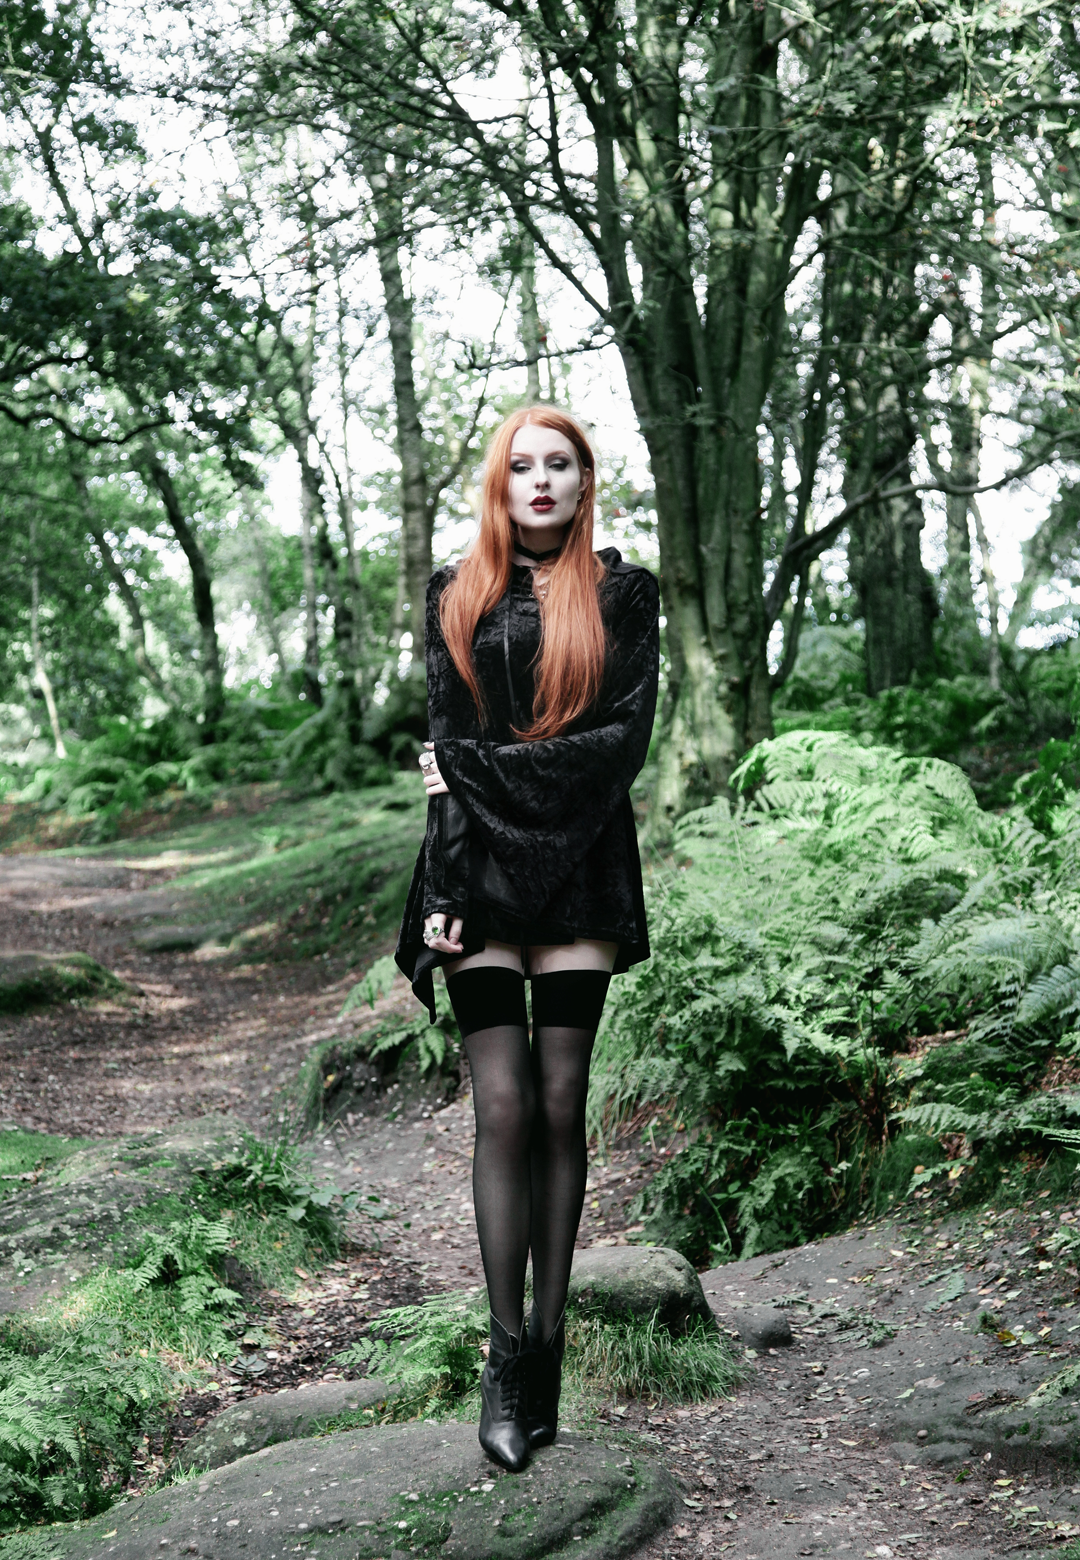 Olivia Emily wears Kilstar Velvet Witch Hood Dress, Over Knee Stockings and Vintage Pointed Boots